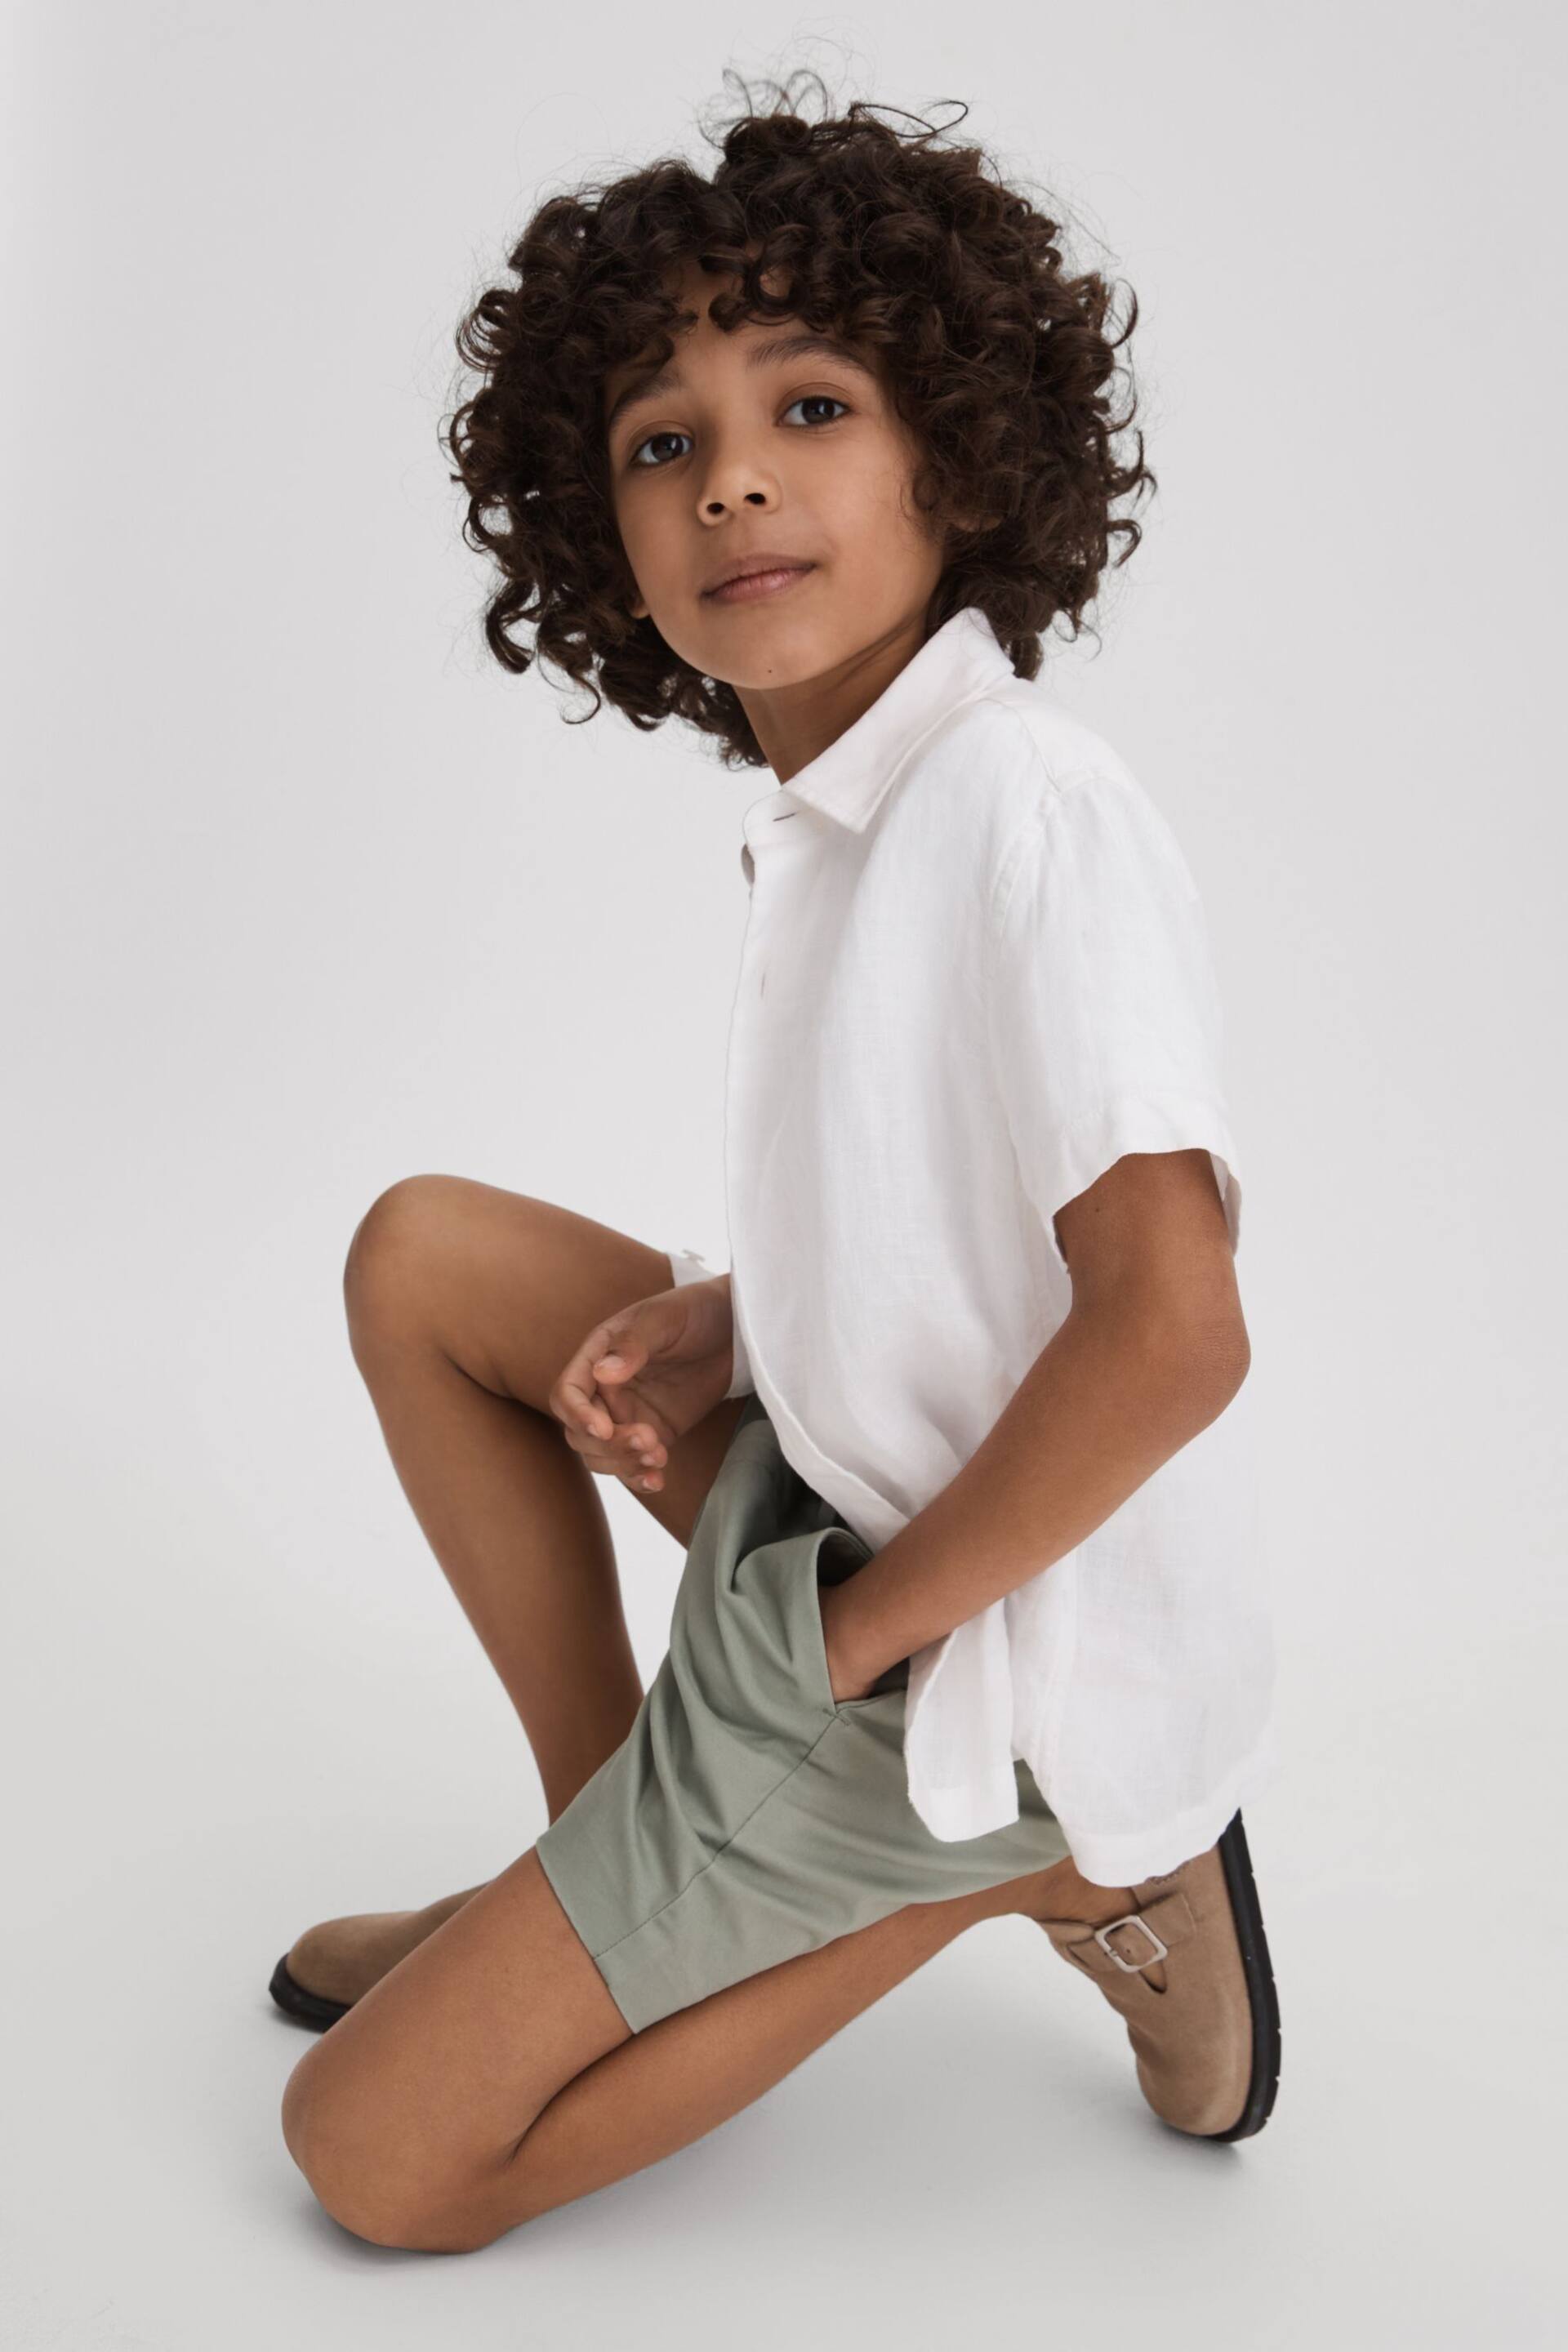 Reiss Pistachio Wicket Junior Casual Chino Shorts - Image 1 of 4